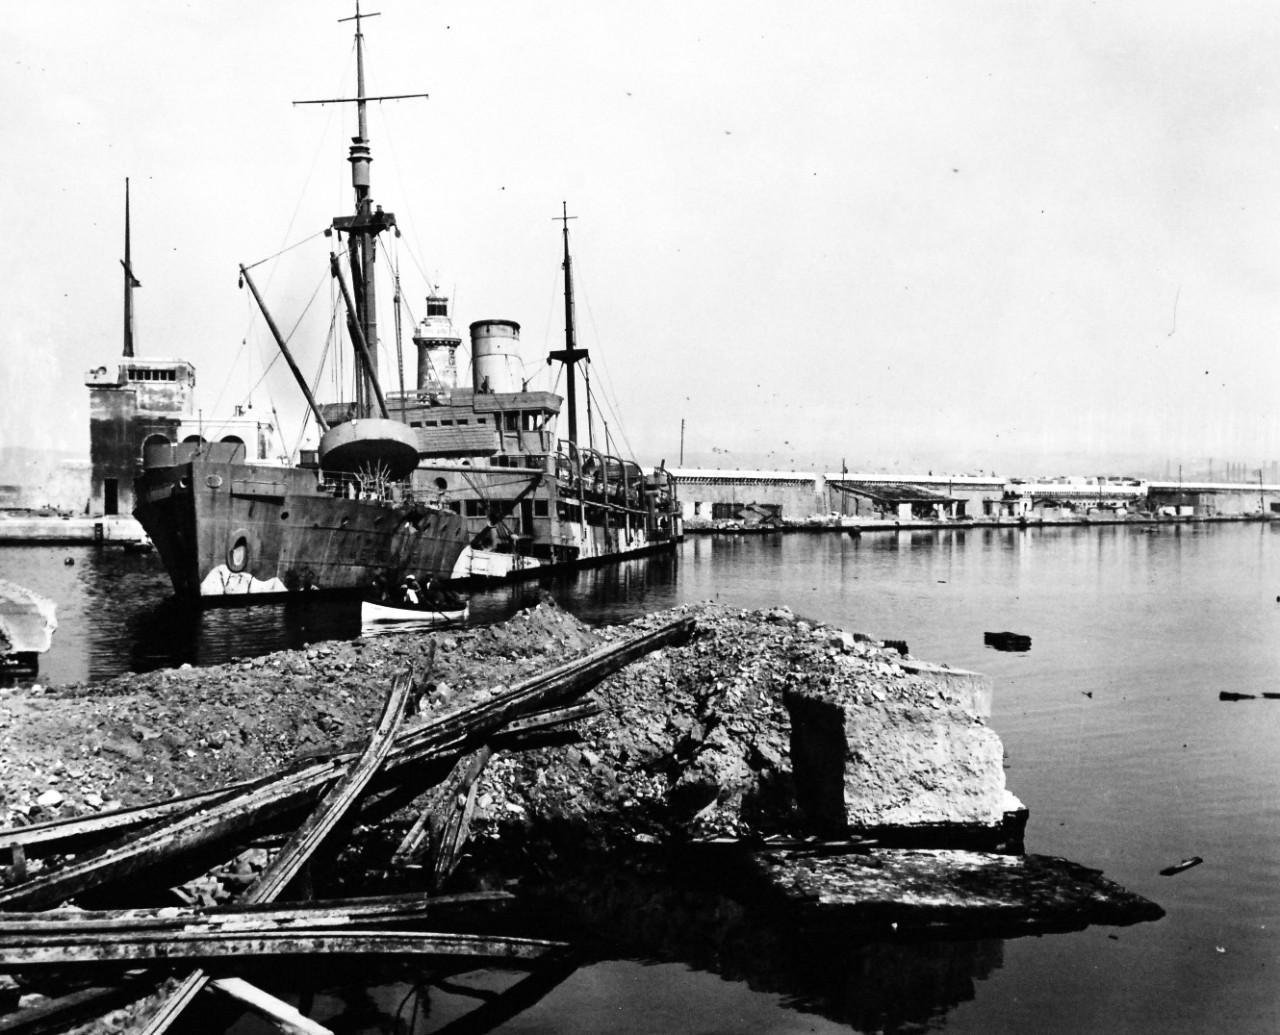 80-G-364057:  Invasion of Southern France, Marseille, August 1944.   Destruction to the harbor and installations at Marseille, France.  Taken by crew of USS Catoctin (AGC-5).  Photograph received on 2 April 1946.   Official U.S. Navy Photograph, now in the collections of the National Archives.  (2014/7/10).